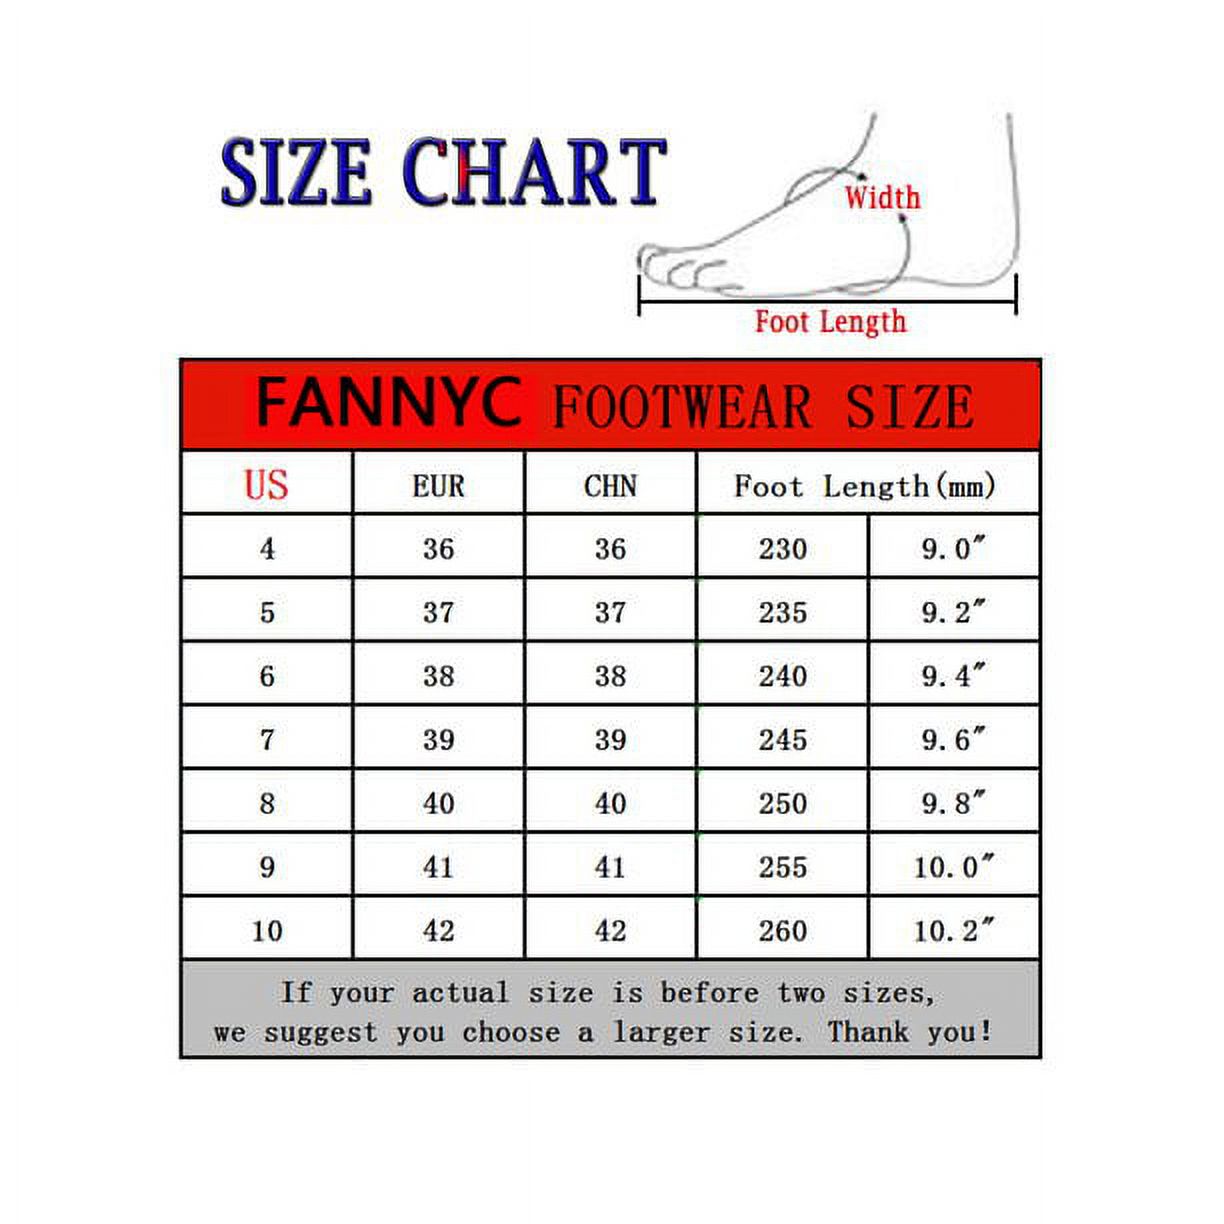 FANNYC Womens Women's Ethnic Style Casual Fit Flat Office Embroidered Shoes Ballet Flats Floral Embroidered Cut Platform Shoe Slip On Casual Driving Loafers Hemp soled shoes - image 3 of 7